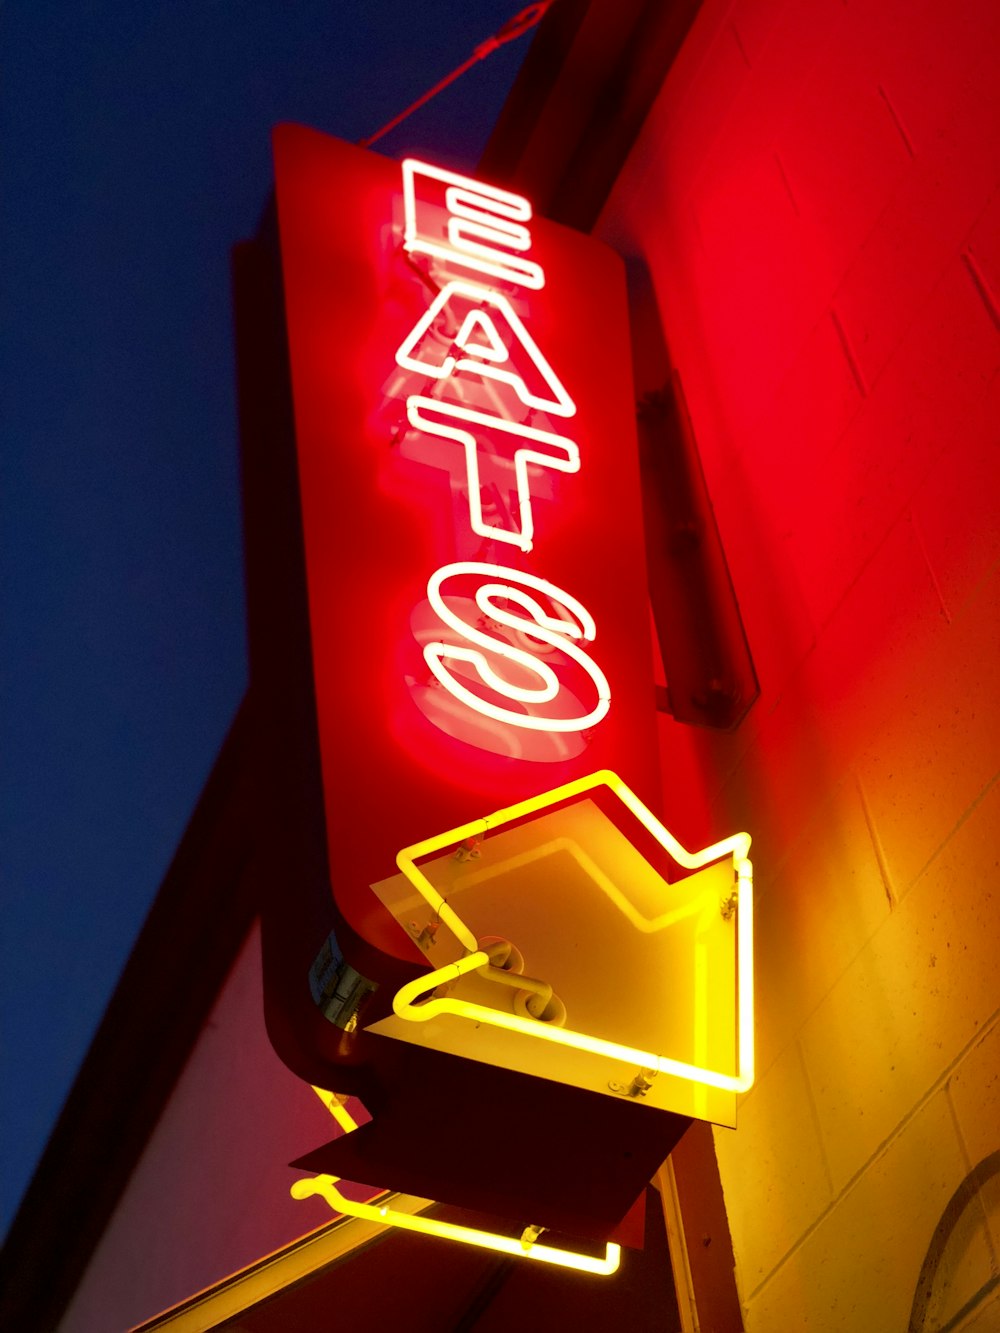 red and yellow eats LED signage turned on